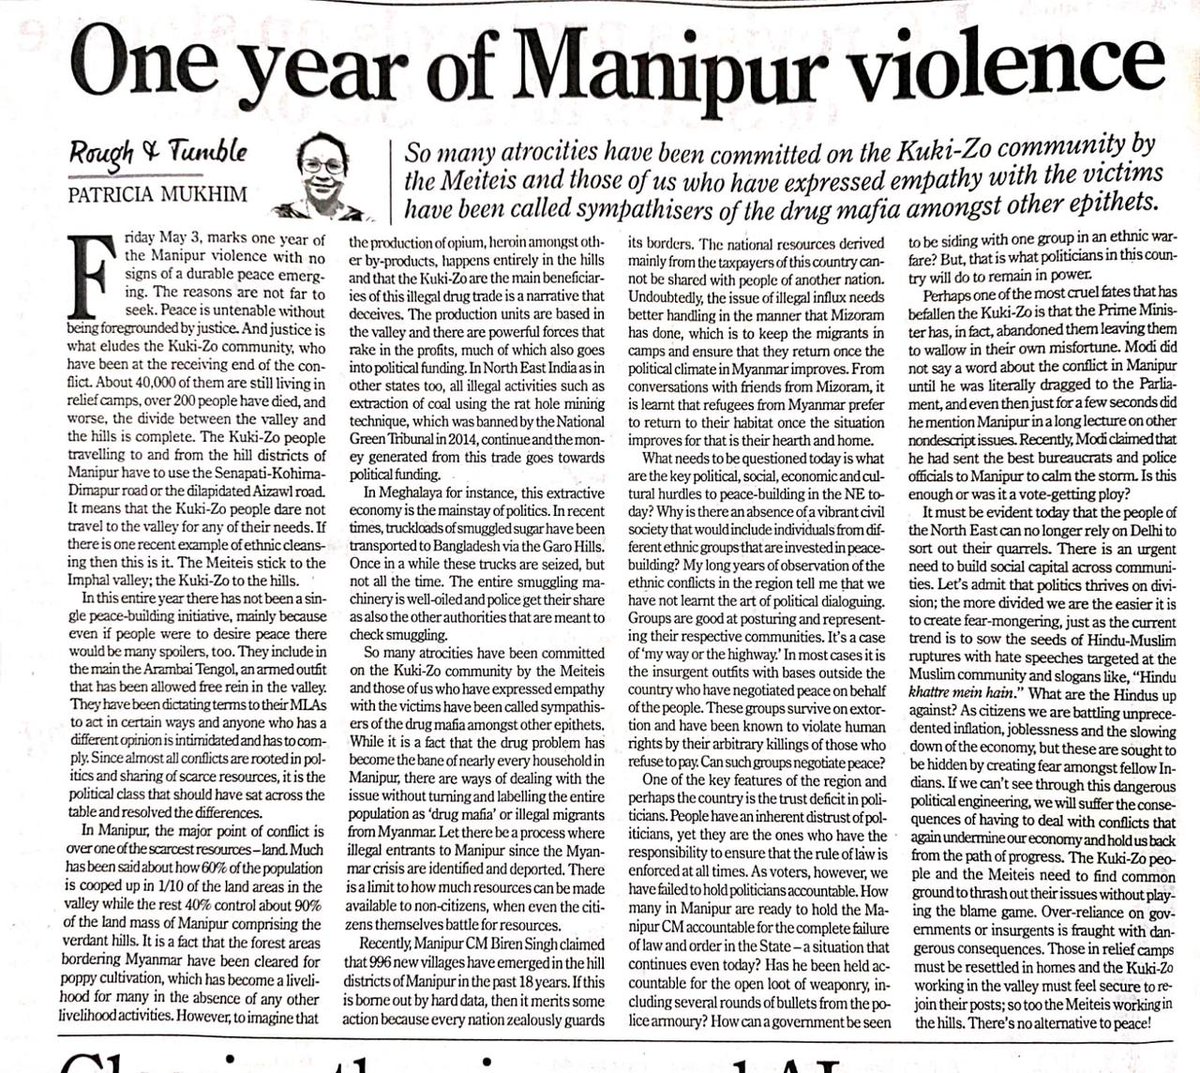 ONE YEAR OF MANIPUR VIOLENCE!

#ManipurViolence